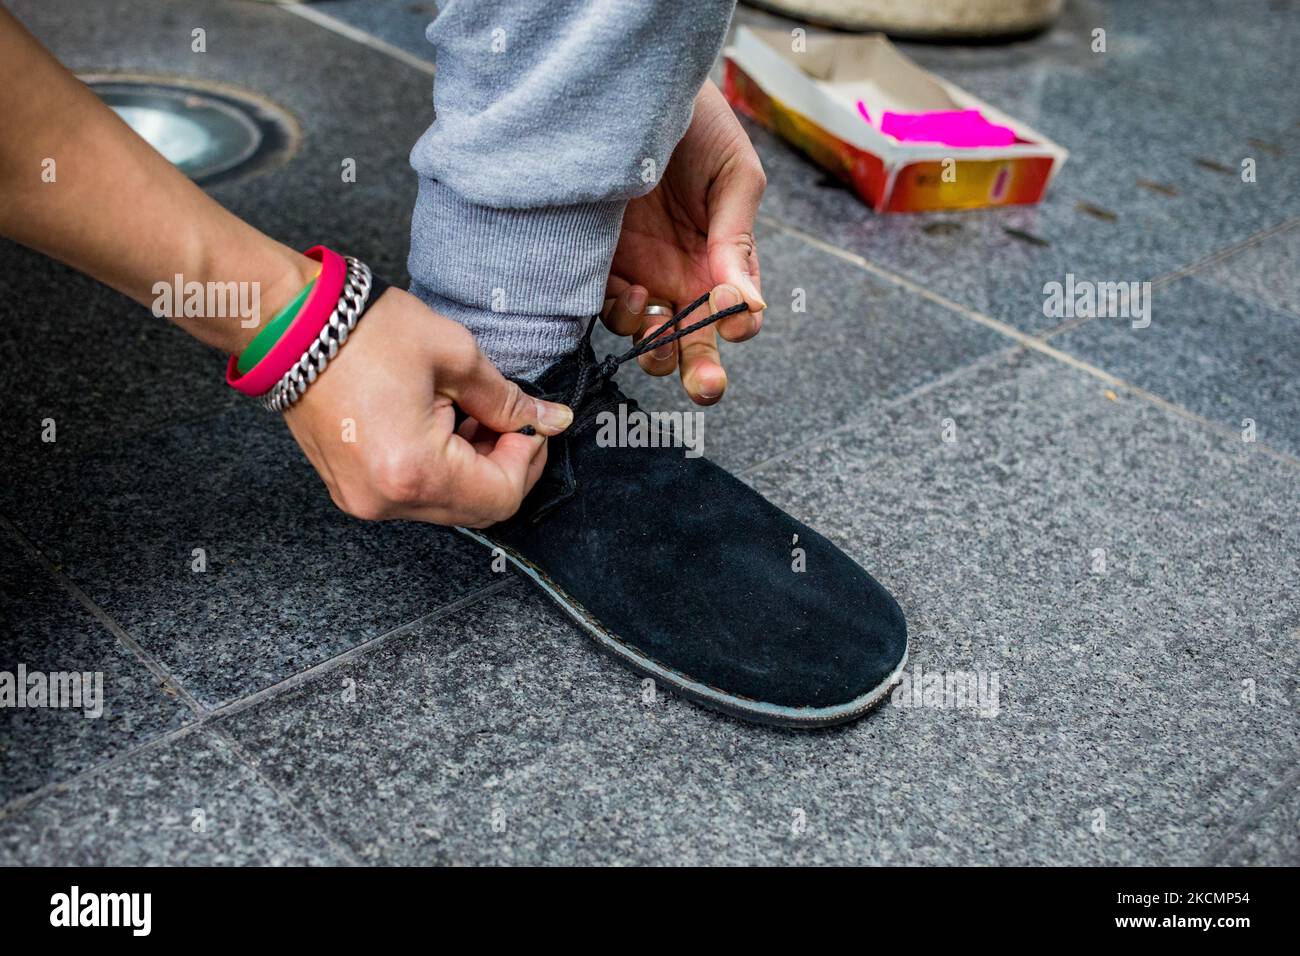 Paris, France on 23 May 2021. A plumfoot player puts on his professional shoes coming from Vietnam before a freestyle session at the passage des Jacobins. To date, 4 clubs are active in France: Dunkerque, Paris, Puteaux and Marseille, with about 150 members. Stock Photo